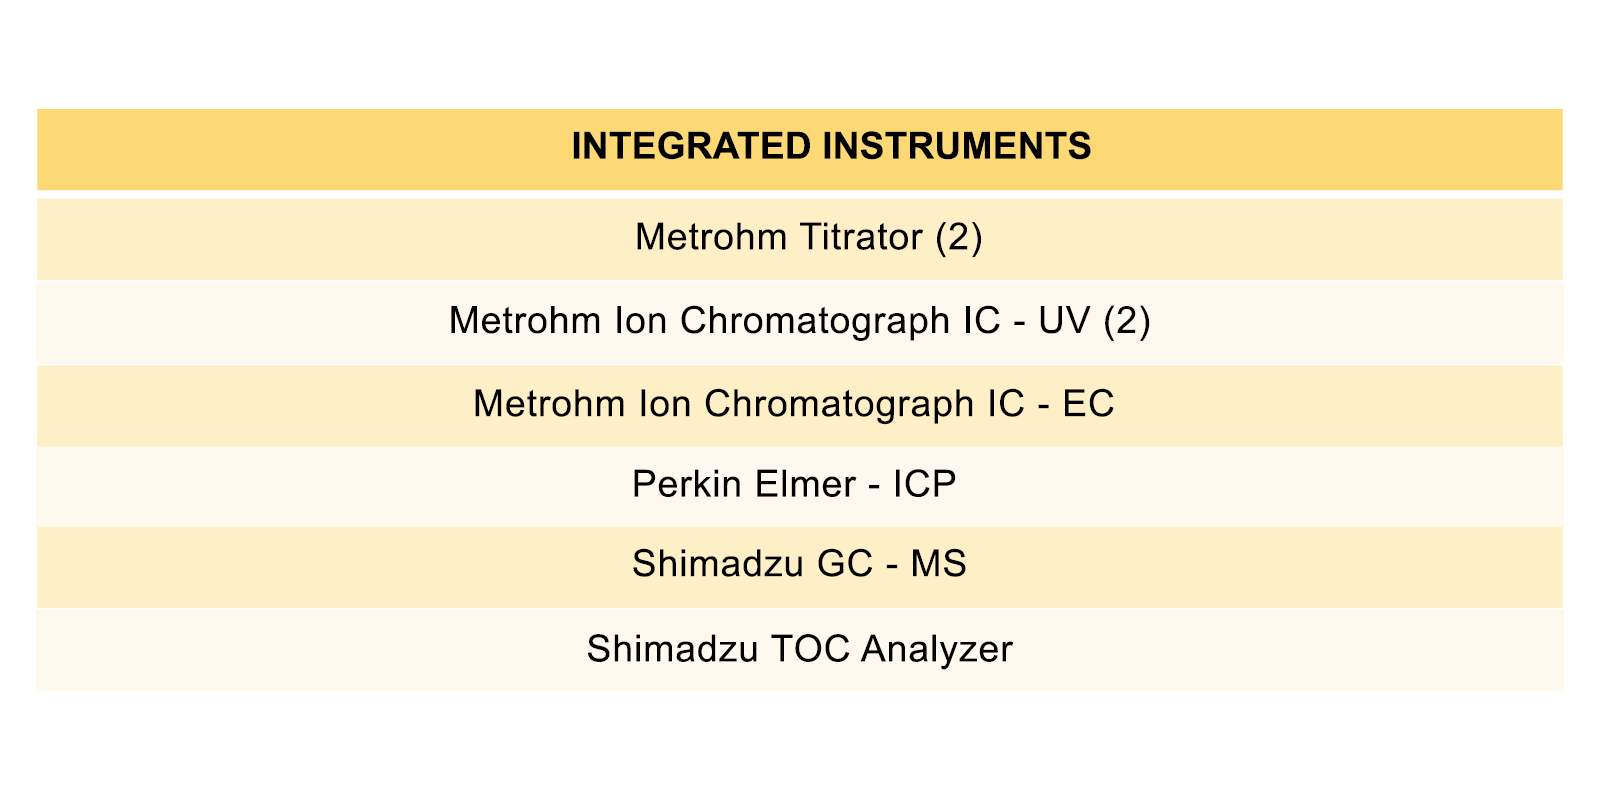 An image of a table  illustrating the list of instruments integrated with Revol LIMS (Laboratory Information Management System).